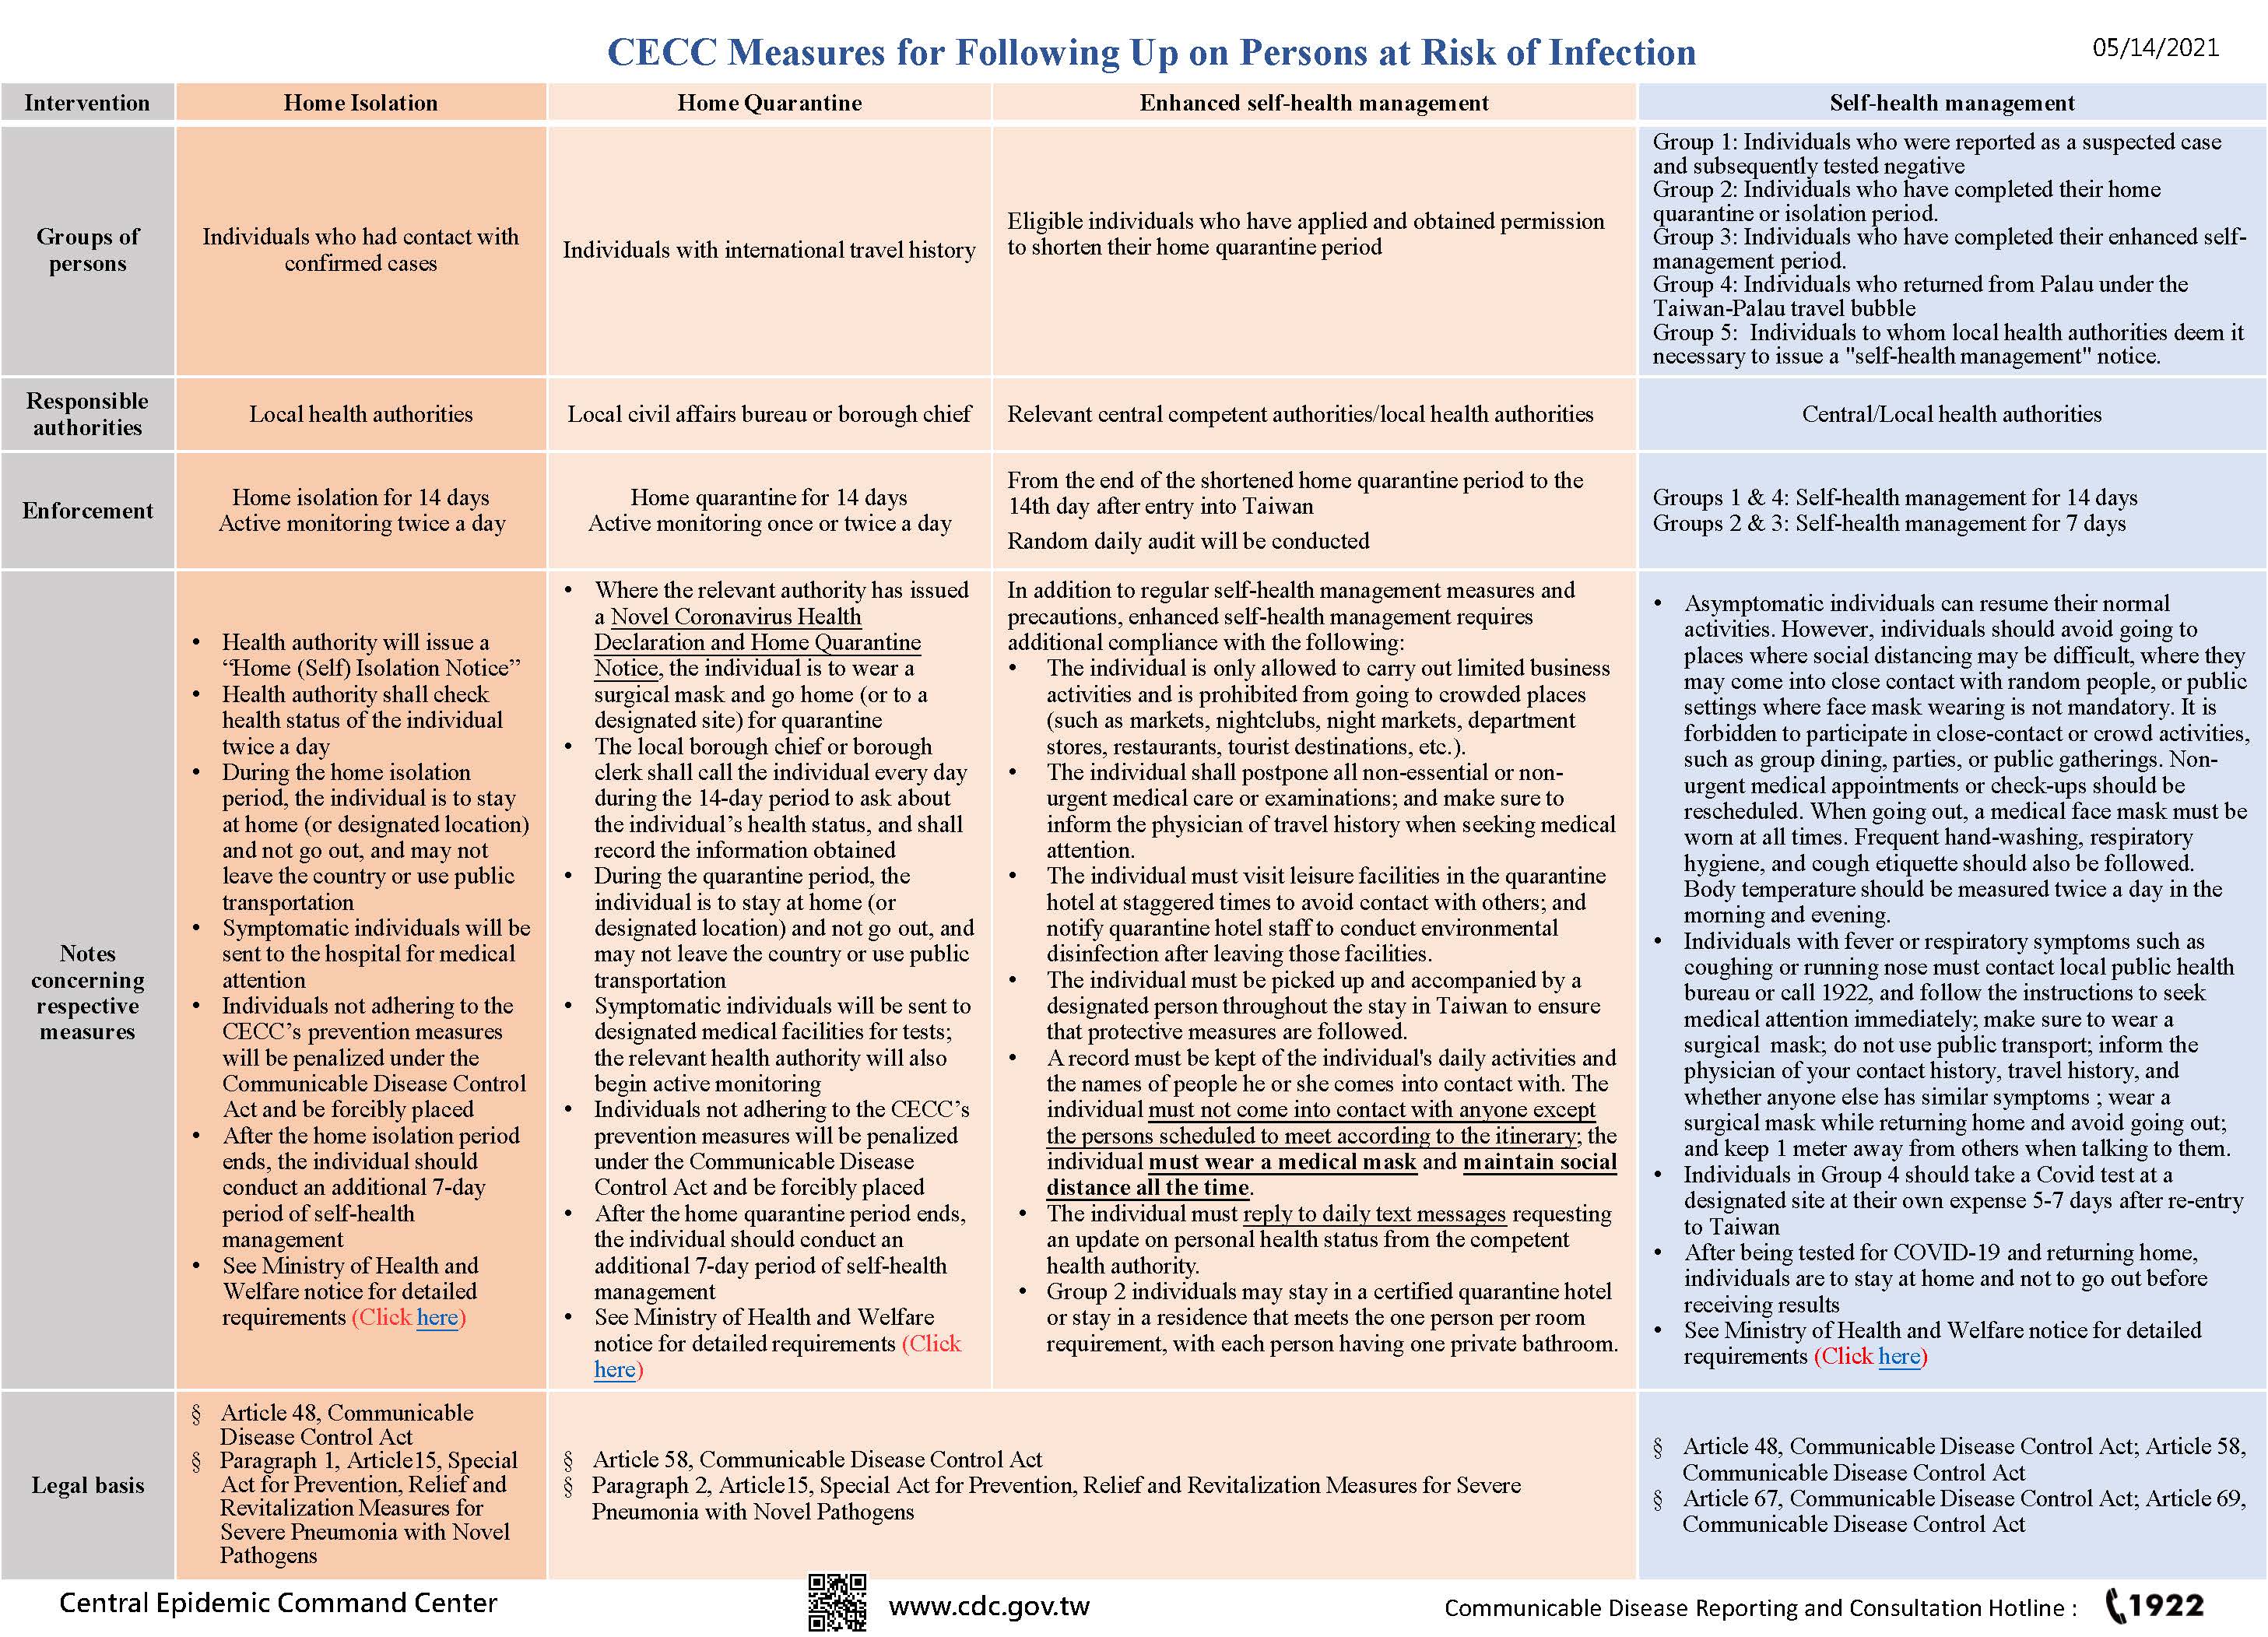 CECC Measures for Following Up on Persons at Risk of Infection